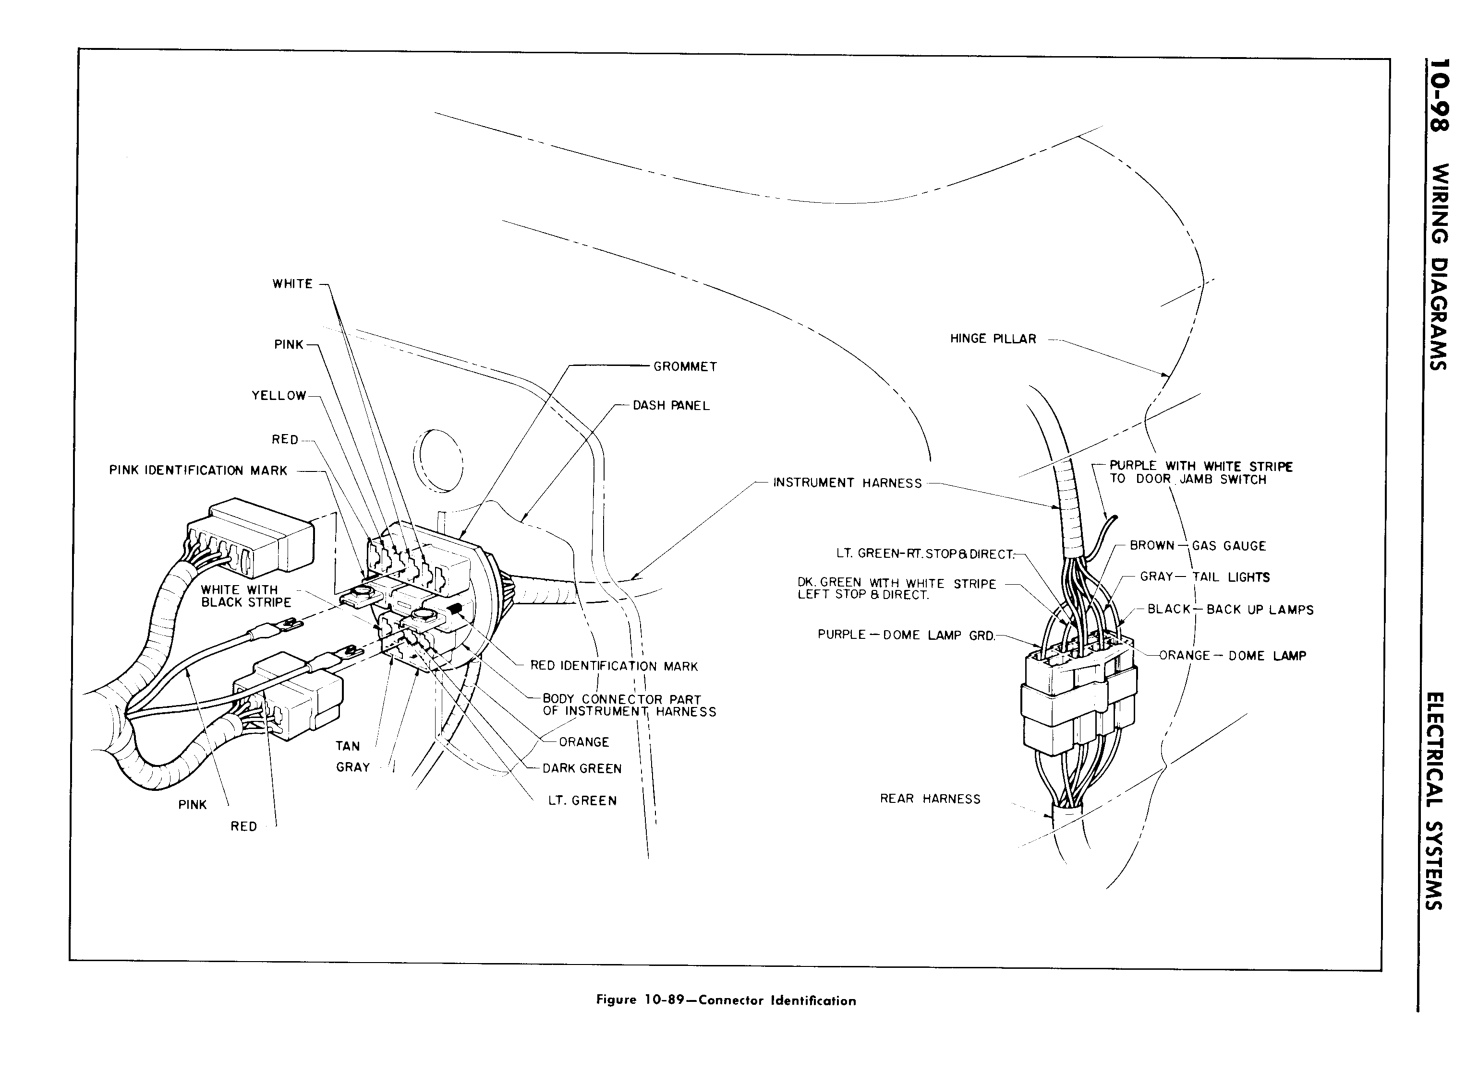 n_11 1960 Buick Shop Manual - Electrical Systems-098-098.jpg